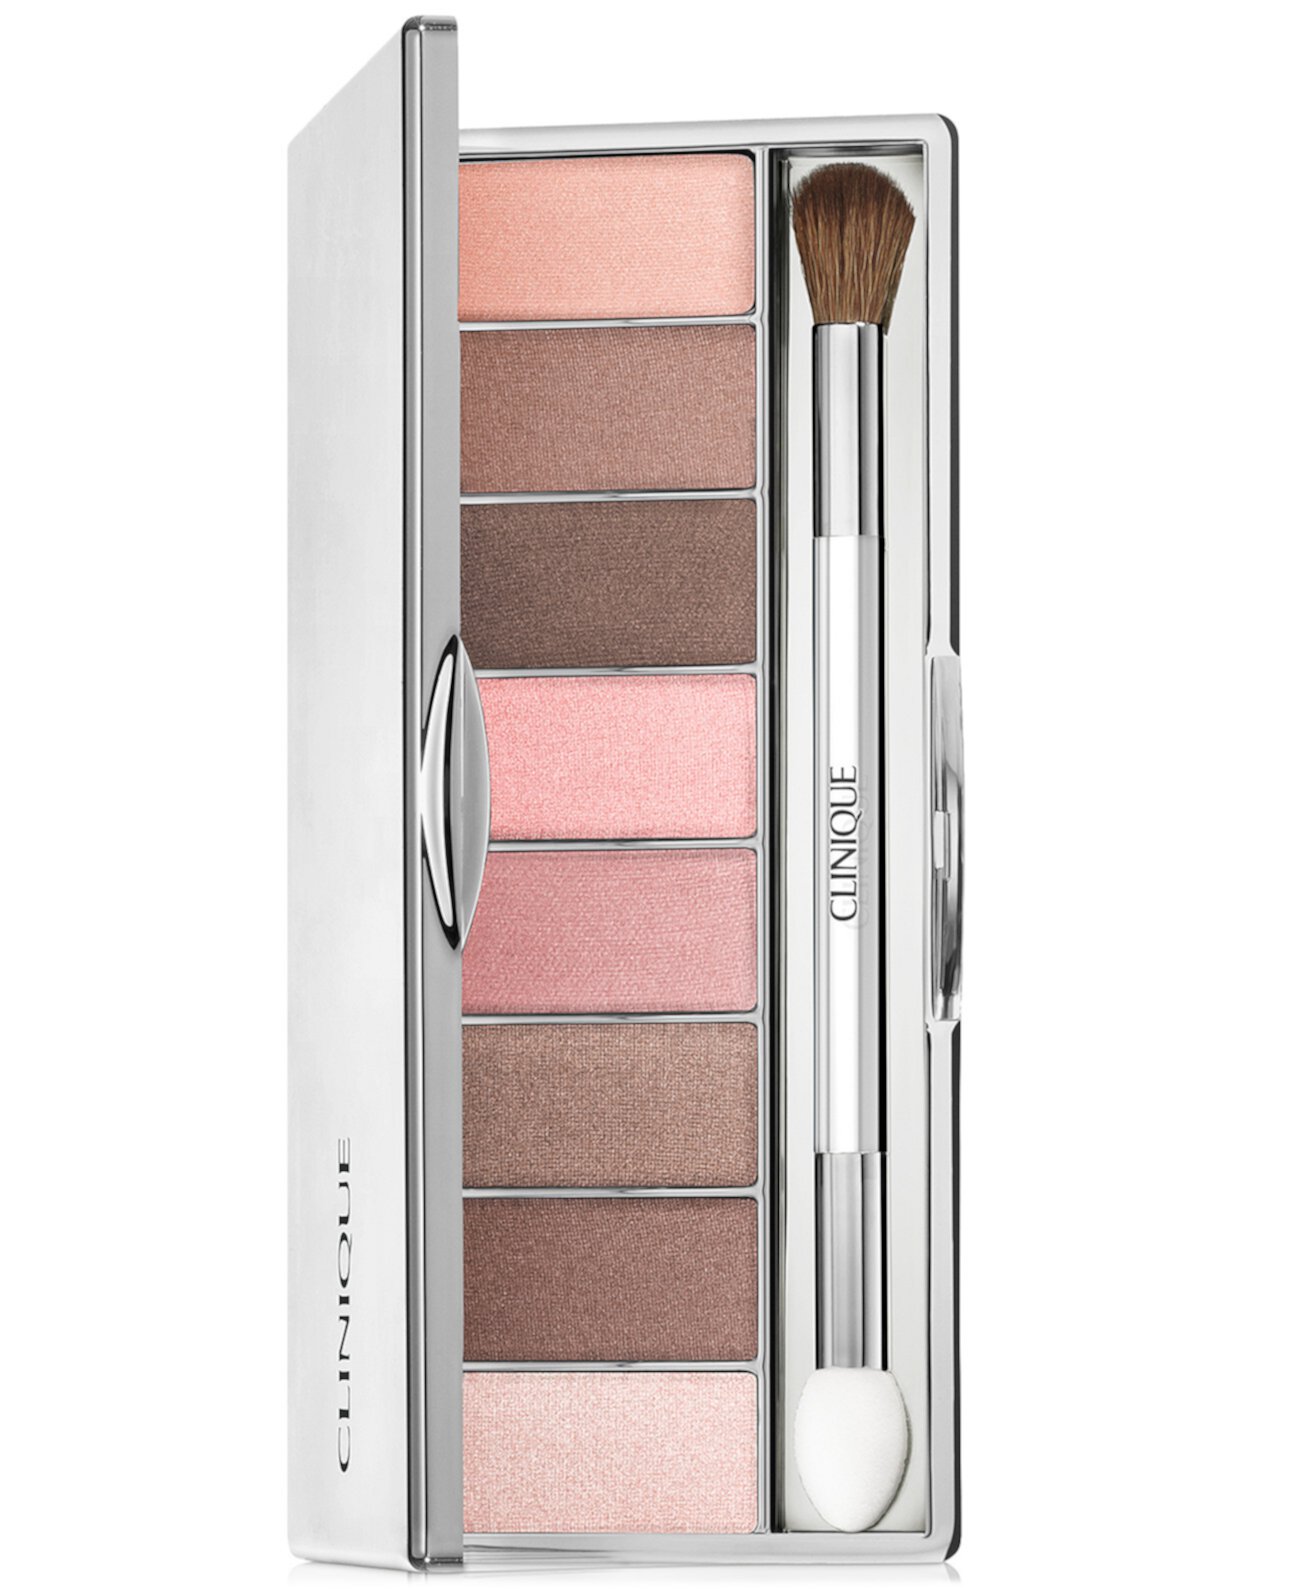 All About Shadow Octet Eyeshadow Palette - Pink Honey, 0.31 oz. Clinique